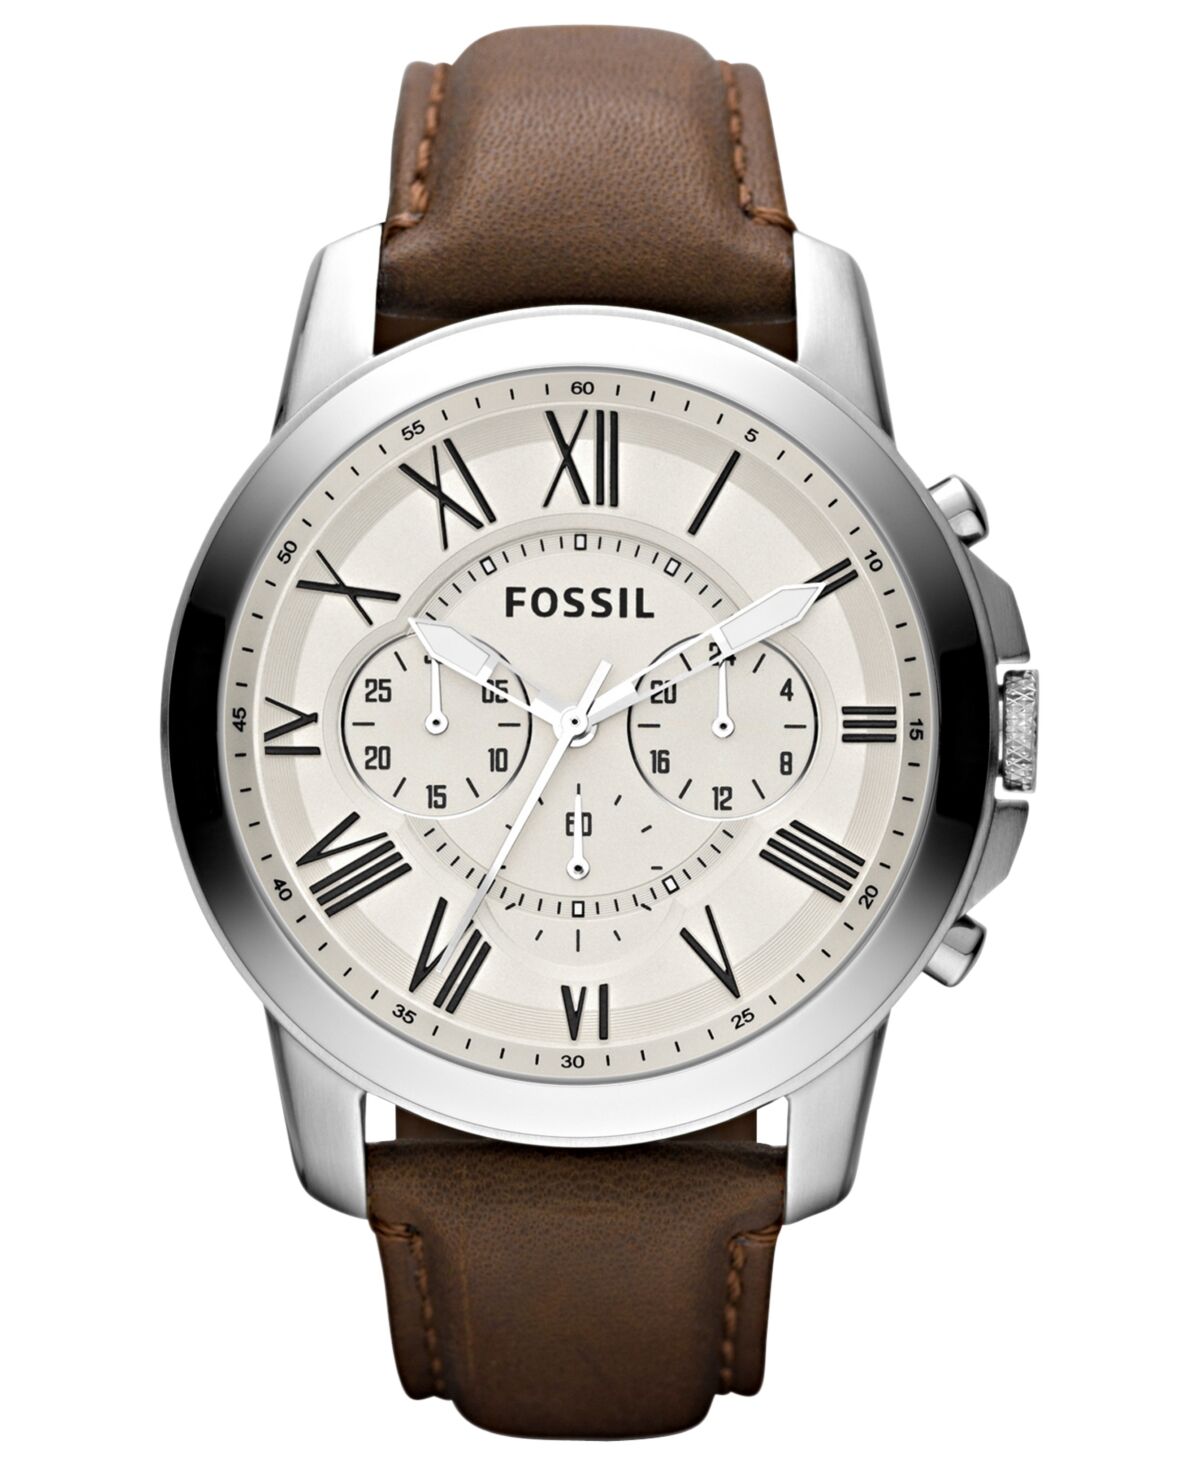 Fossil Men's Chronograph Grant Brown Leather Strap Watch 44mm - Brown/Eggshell